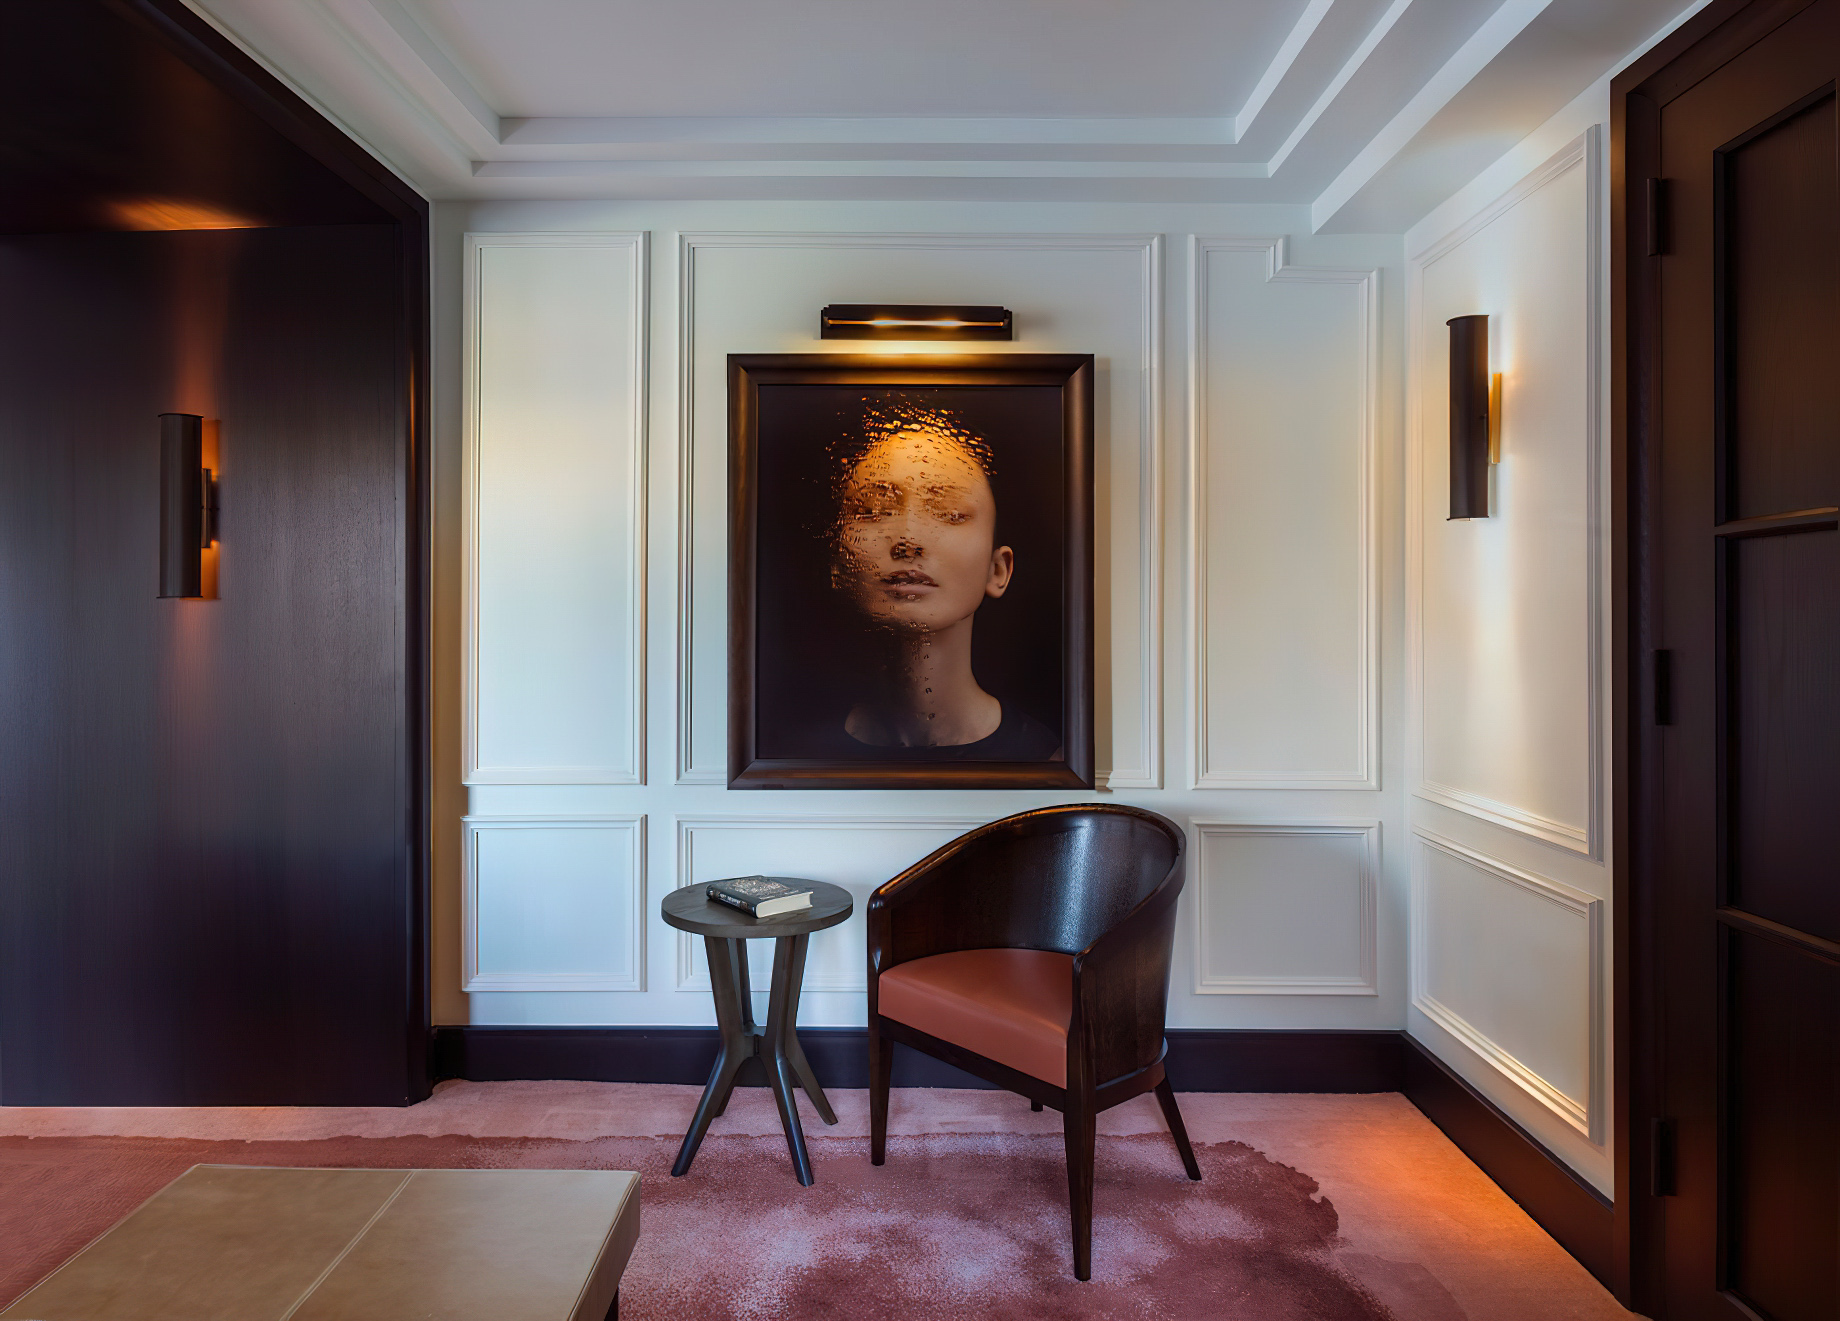 The Ritz-Carlton New York, Central Park Hotel – New York, NY, USA – The Presidential Suite Chair and Artwork